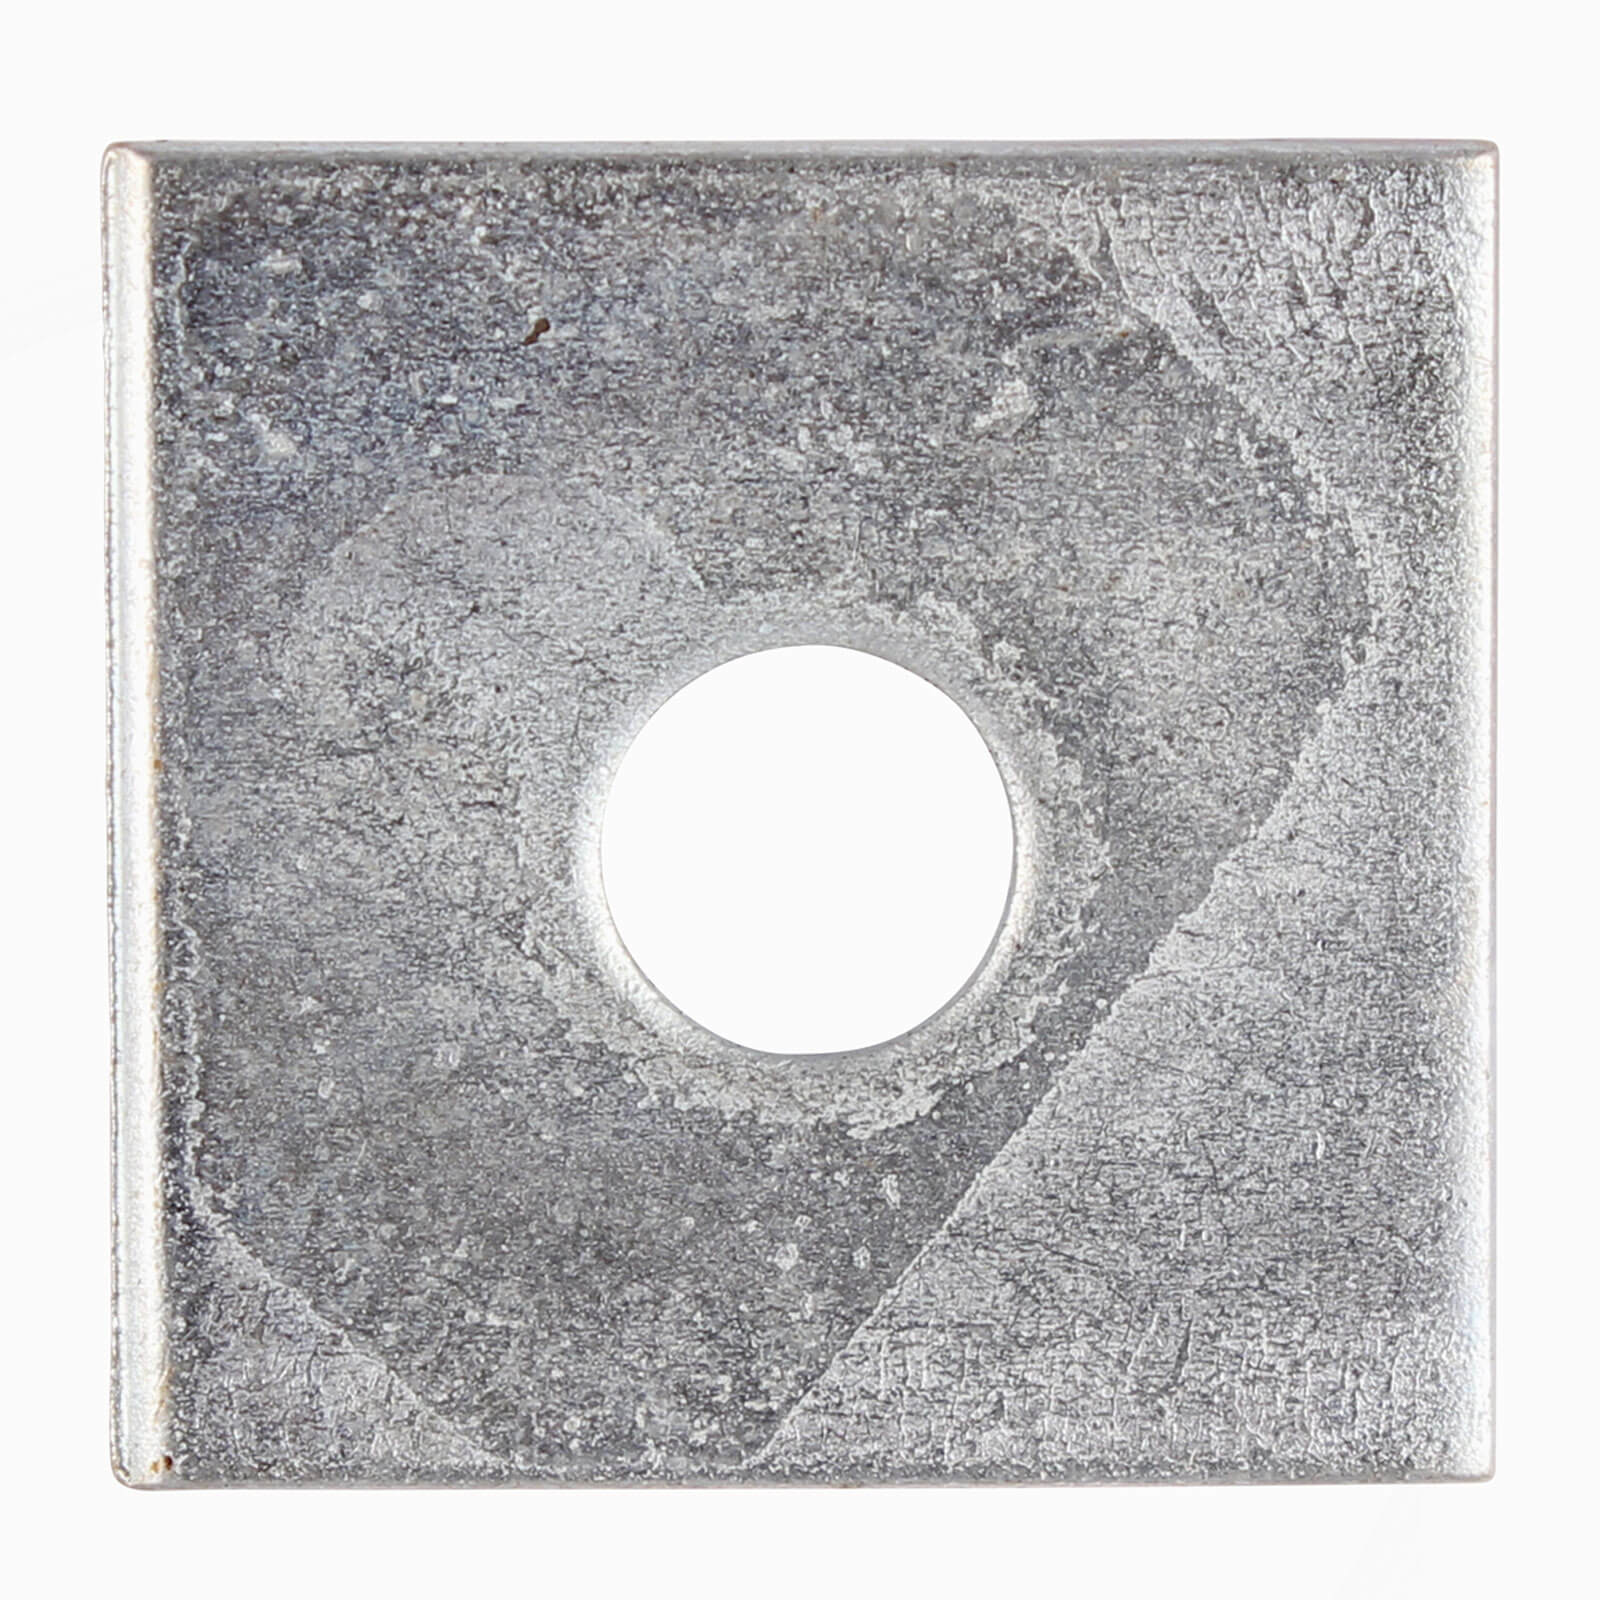 Image of Square Plate Washer Zinc Plated 10mm 40mm Pack of 150